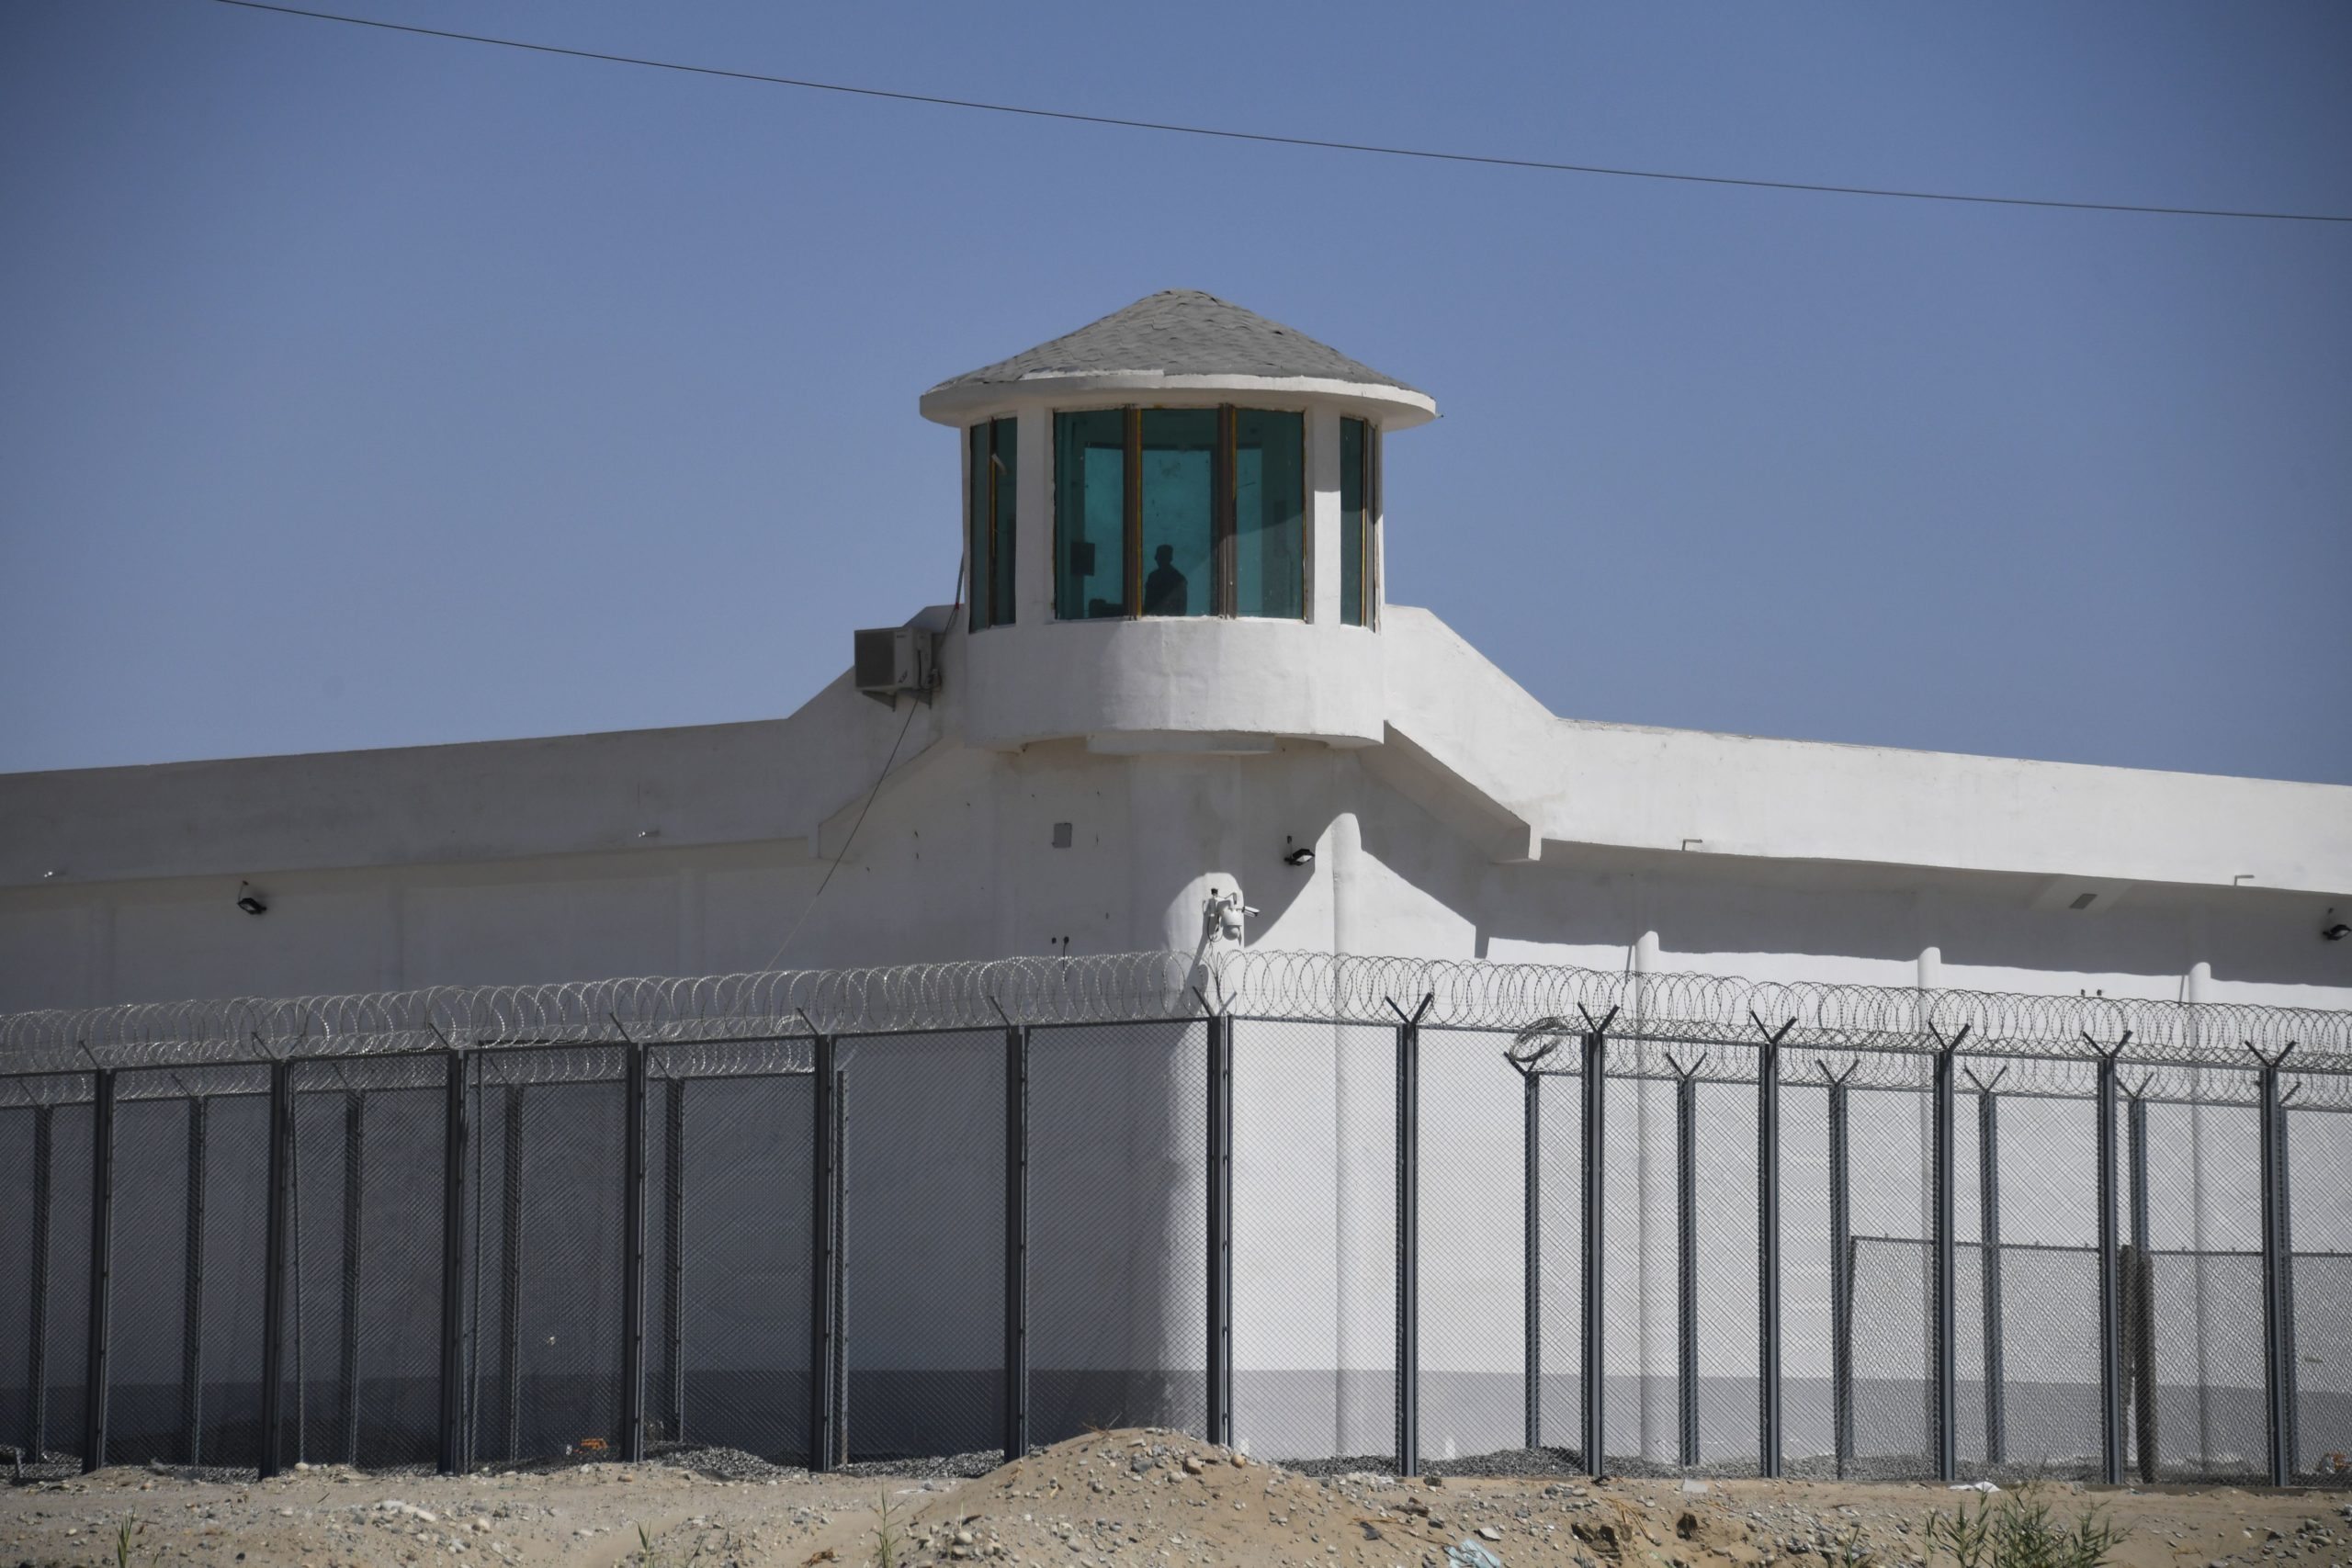 TOPSHOT - This photo taken on May 31, 2019 shows a watchtower on a high-security facility near what is believed to be a re-education camp where mostly Muslim ethnic minorities are detained, on the outskirts of Hotan, in China's northwestern Xinjiang region. - As many as one million ethnic Uighurs and other mostly Muslim minorities are believed to be held in a network of internment camps in Xinjiang, but China has not given any figures and describes the facilities as "vocational education centres" aimed at steering people away from extremism. (Photo by GREG BAKER / AFP) / TO GO WITH AFP STORY CHINA-XINJIANG-MEDIA-RIGHTS-PRESS,FOCUS BY EVA XIAO (Photo credit should read GREG BAKER/AFP via Getty Images)